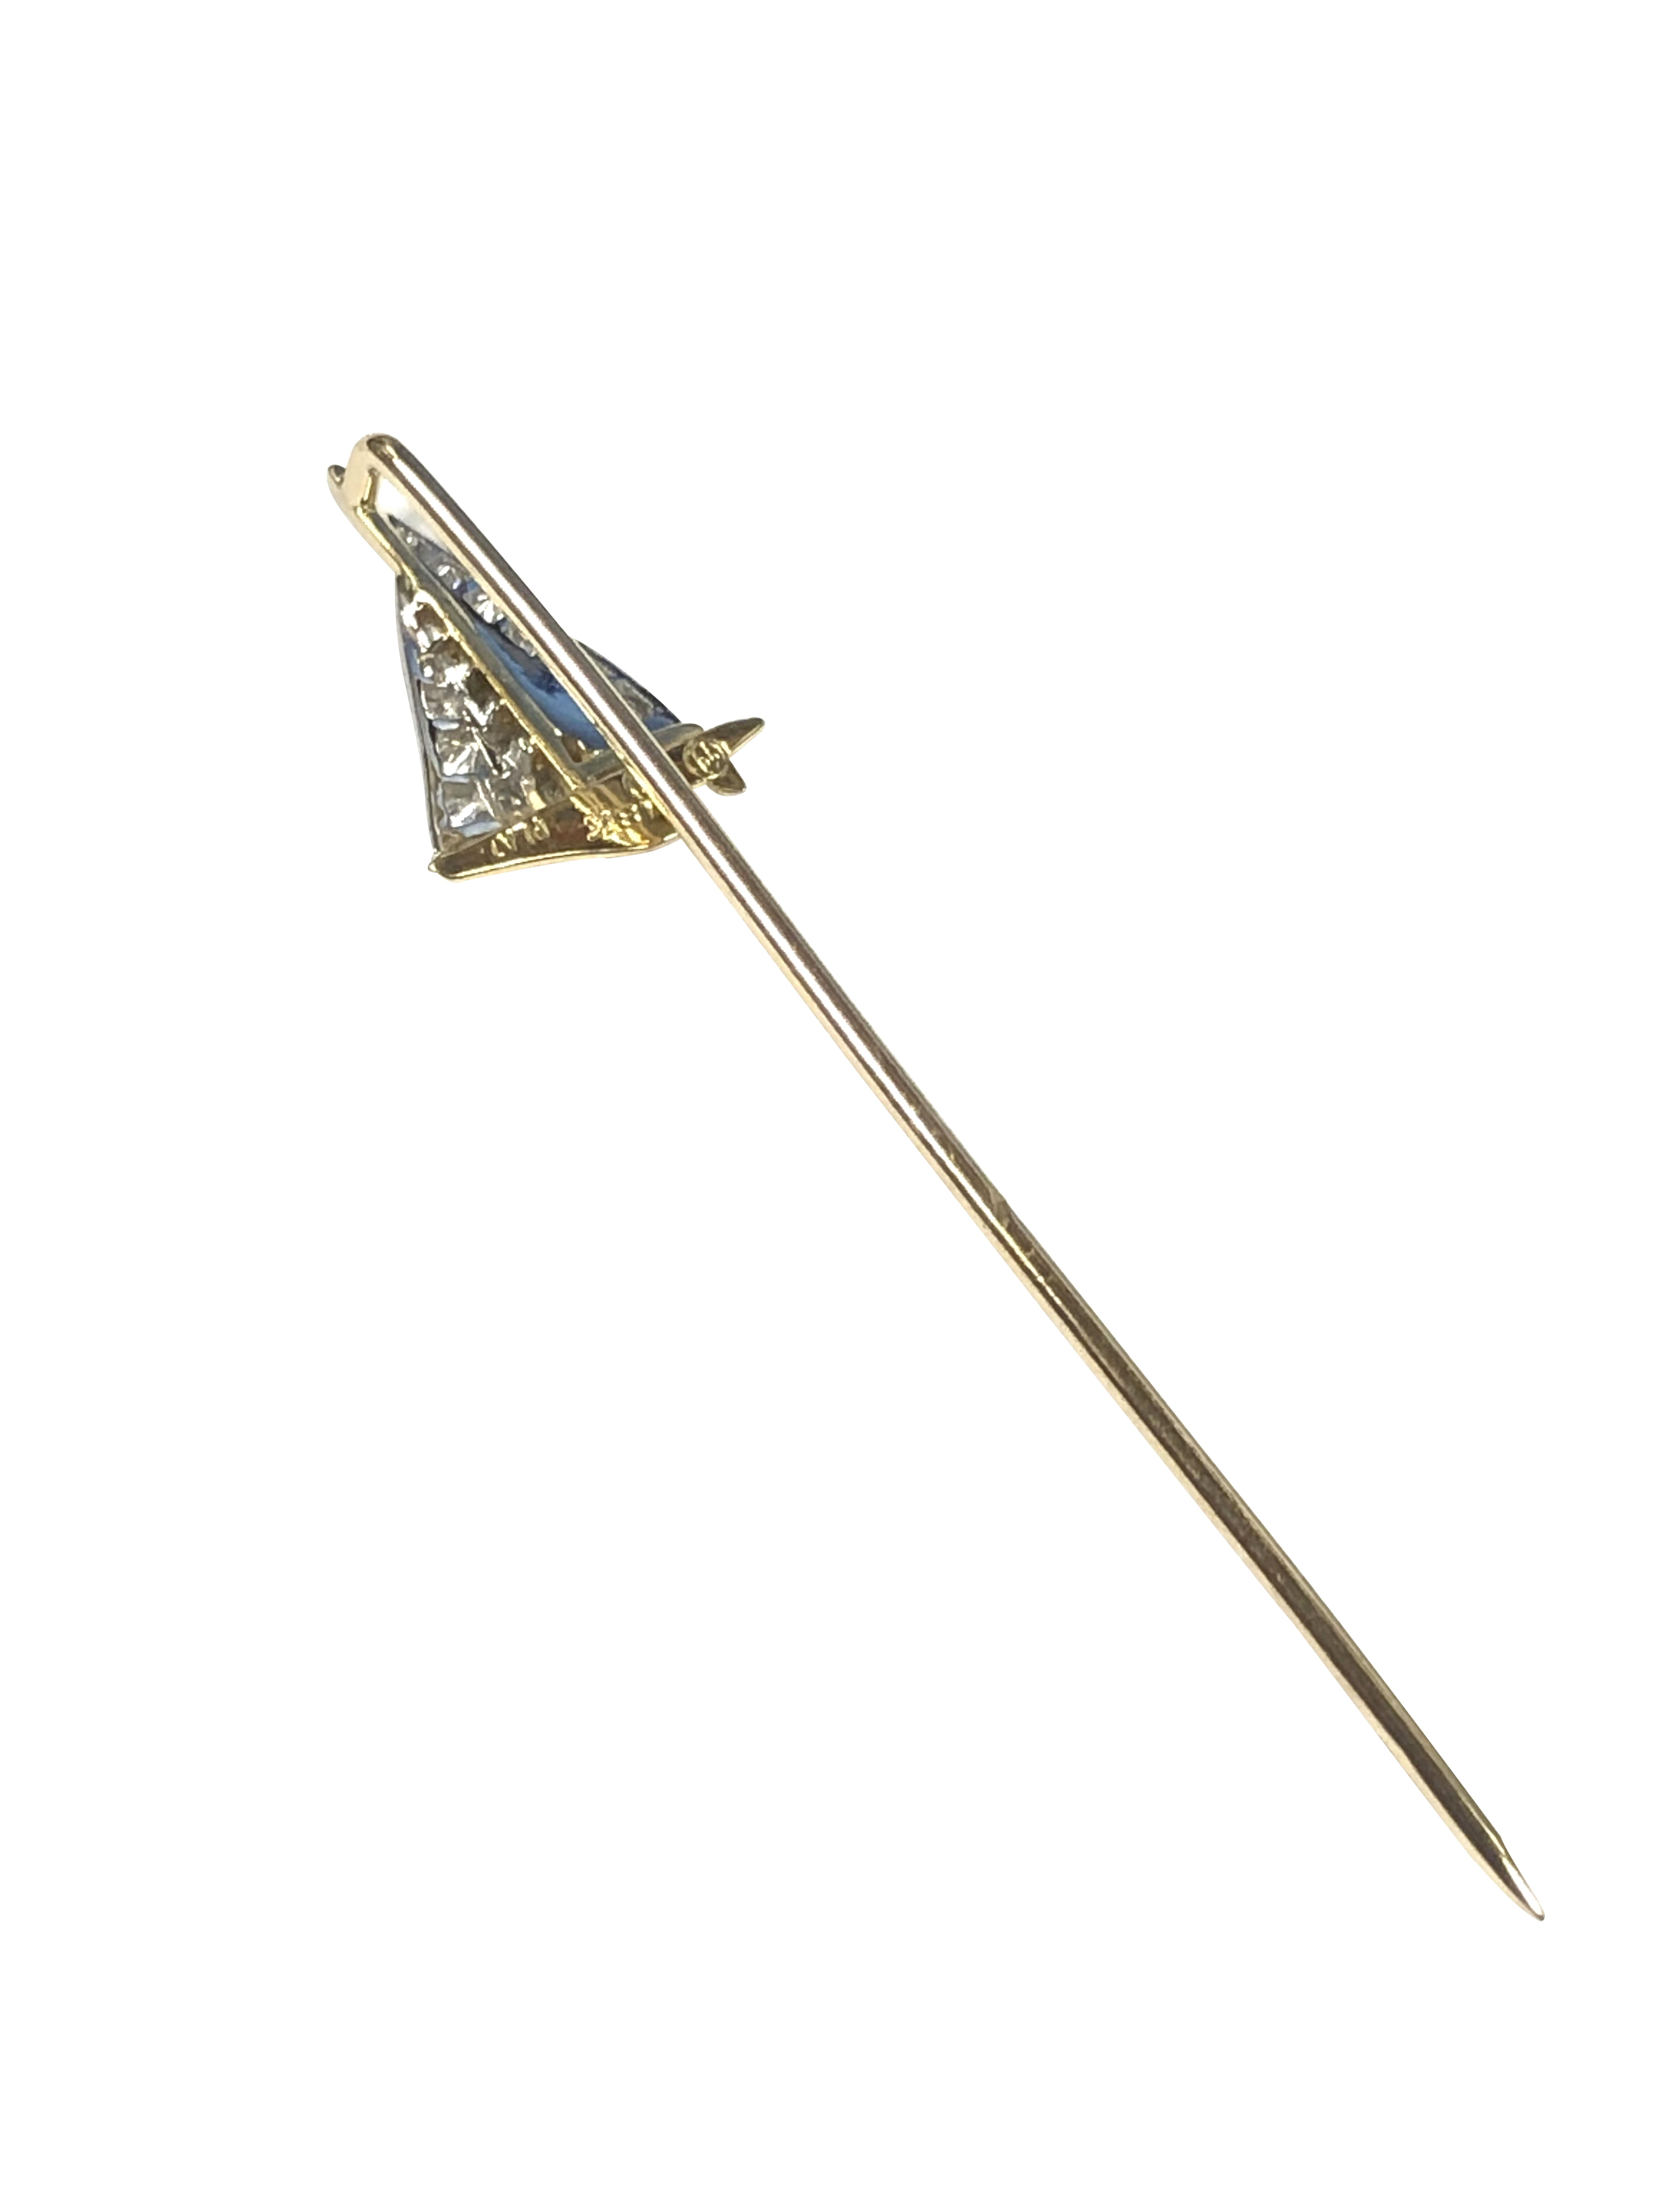 Circa 1990 18K yellow Gold and Platinum Sail Boat Stick Pin, measuring 2 1/8 inches in length with the sailboat portion measuring 1/2 X 3/8 inch. Set with Round Brilliant cut Diamonds totaling .20 Carat.